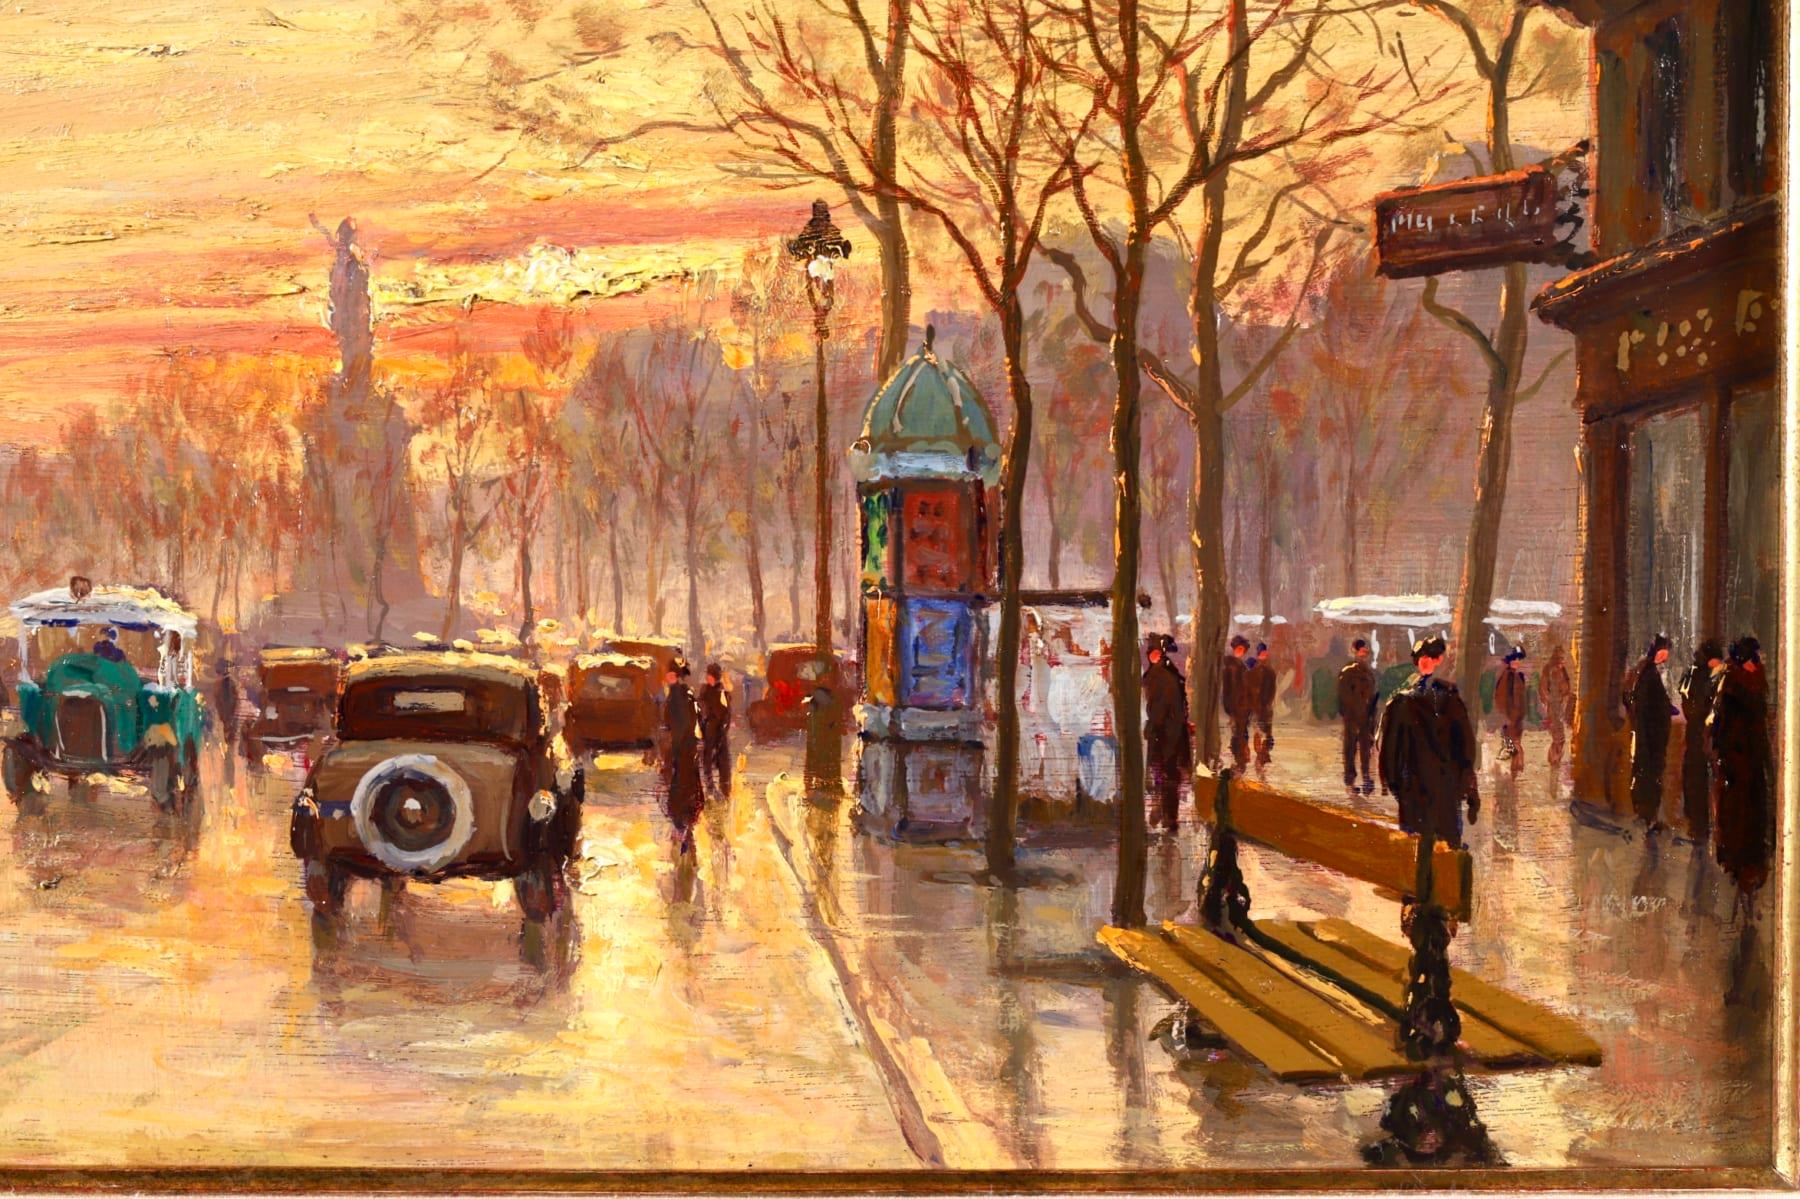 Sunset - Paris - Post Impressionist Oil, Figutres in Cityscape by Henry Malfroy 6